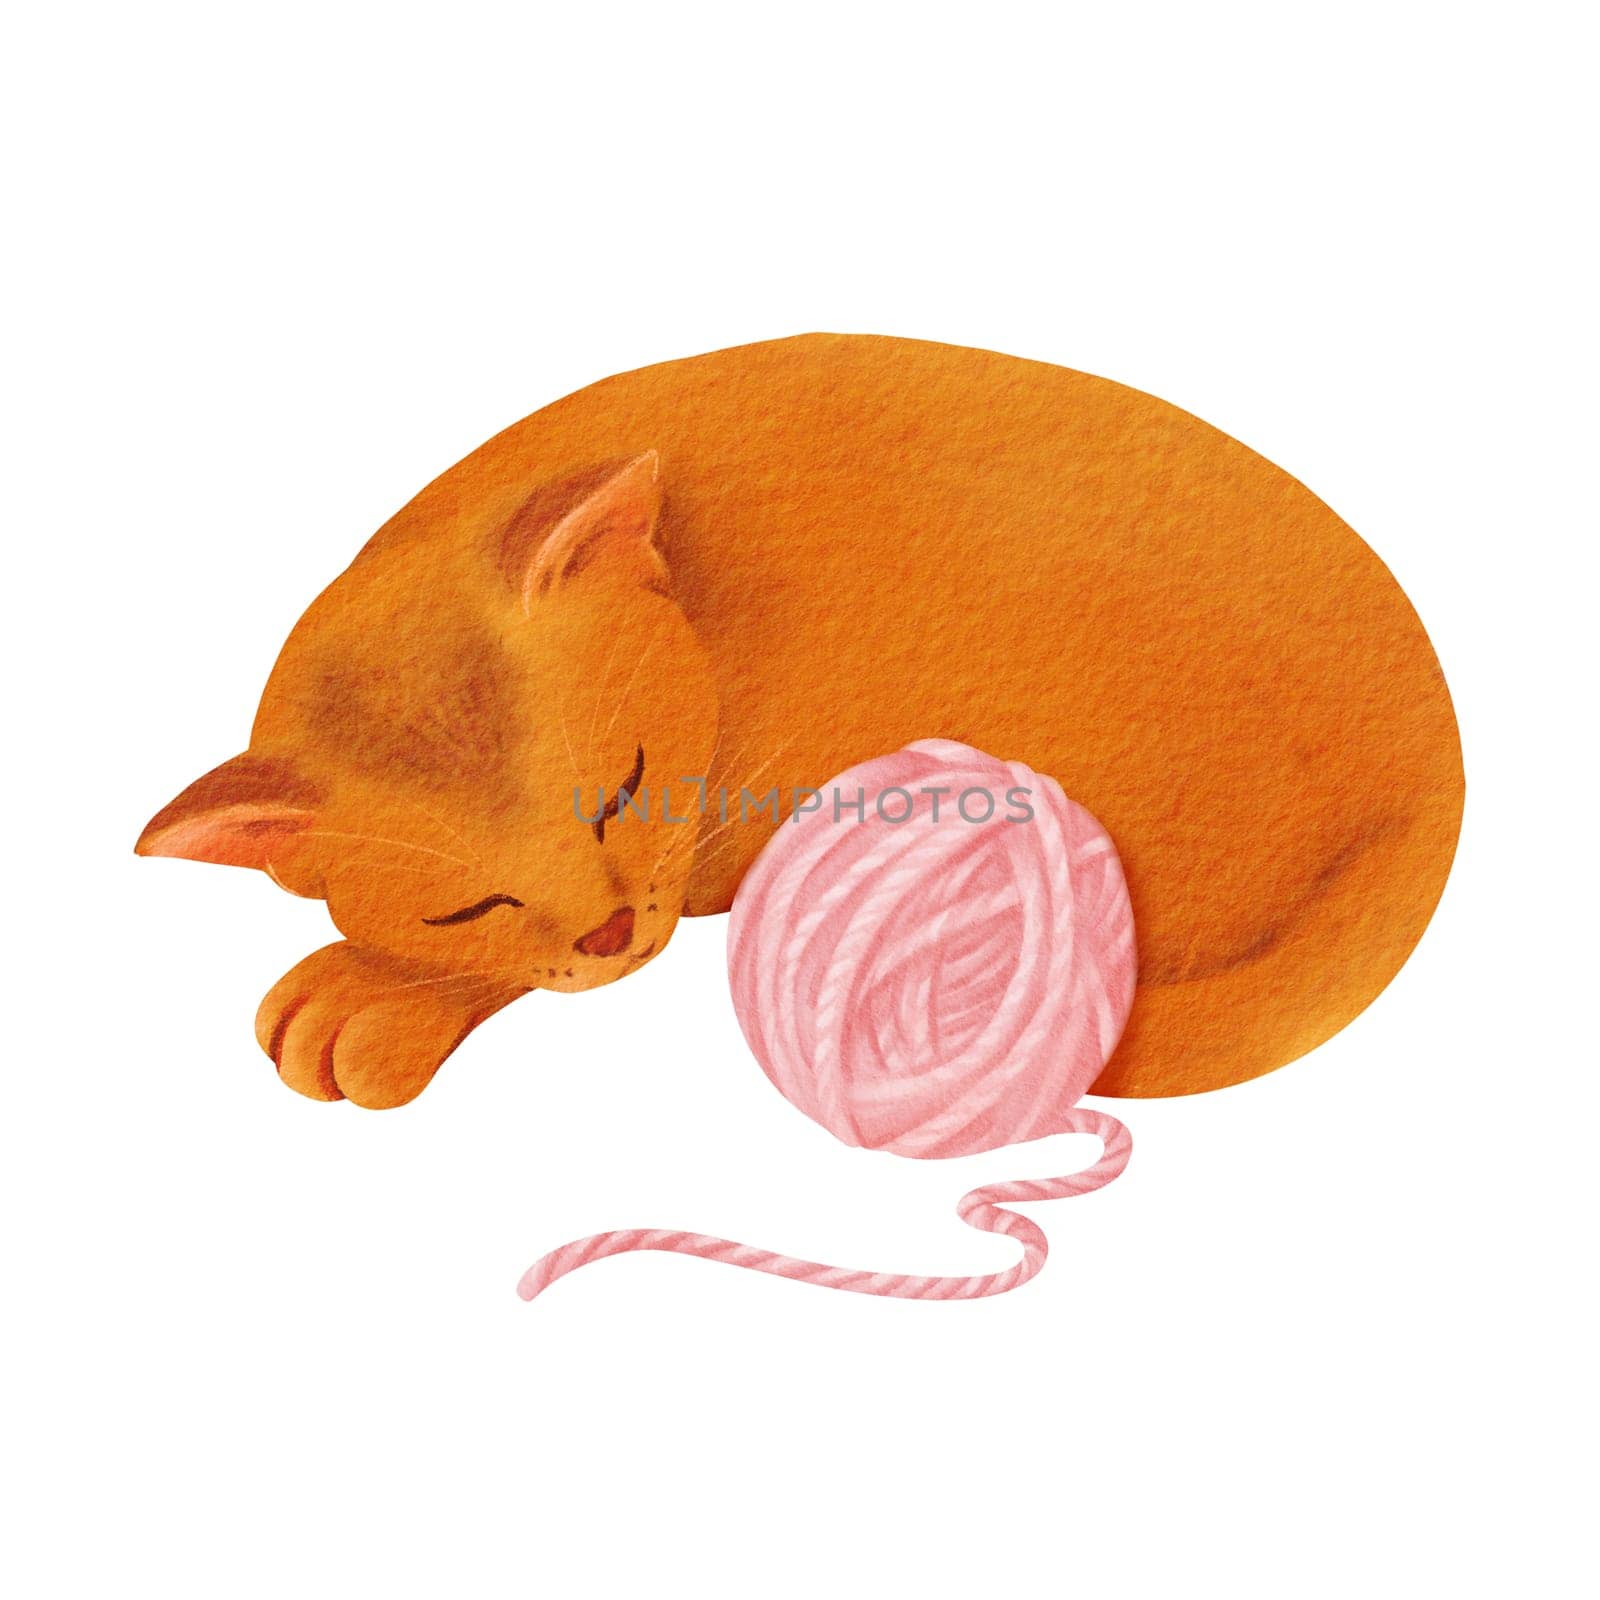 A composition a ginger kitten curled up asleep beside a pink yarn skein, for greeting cards, children's book illustrations, or pet-themed designs. Watercolor illustration by Art_Mari_Ka